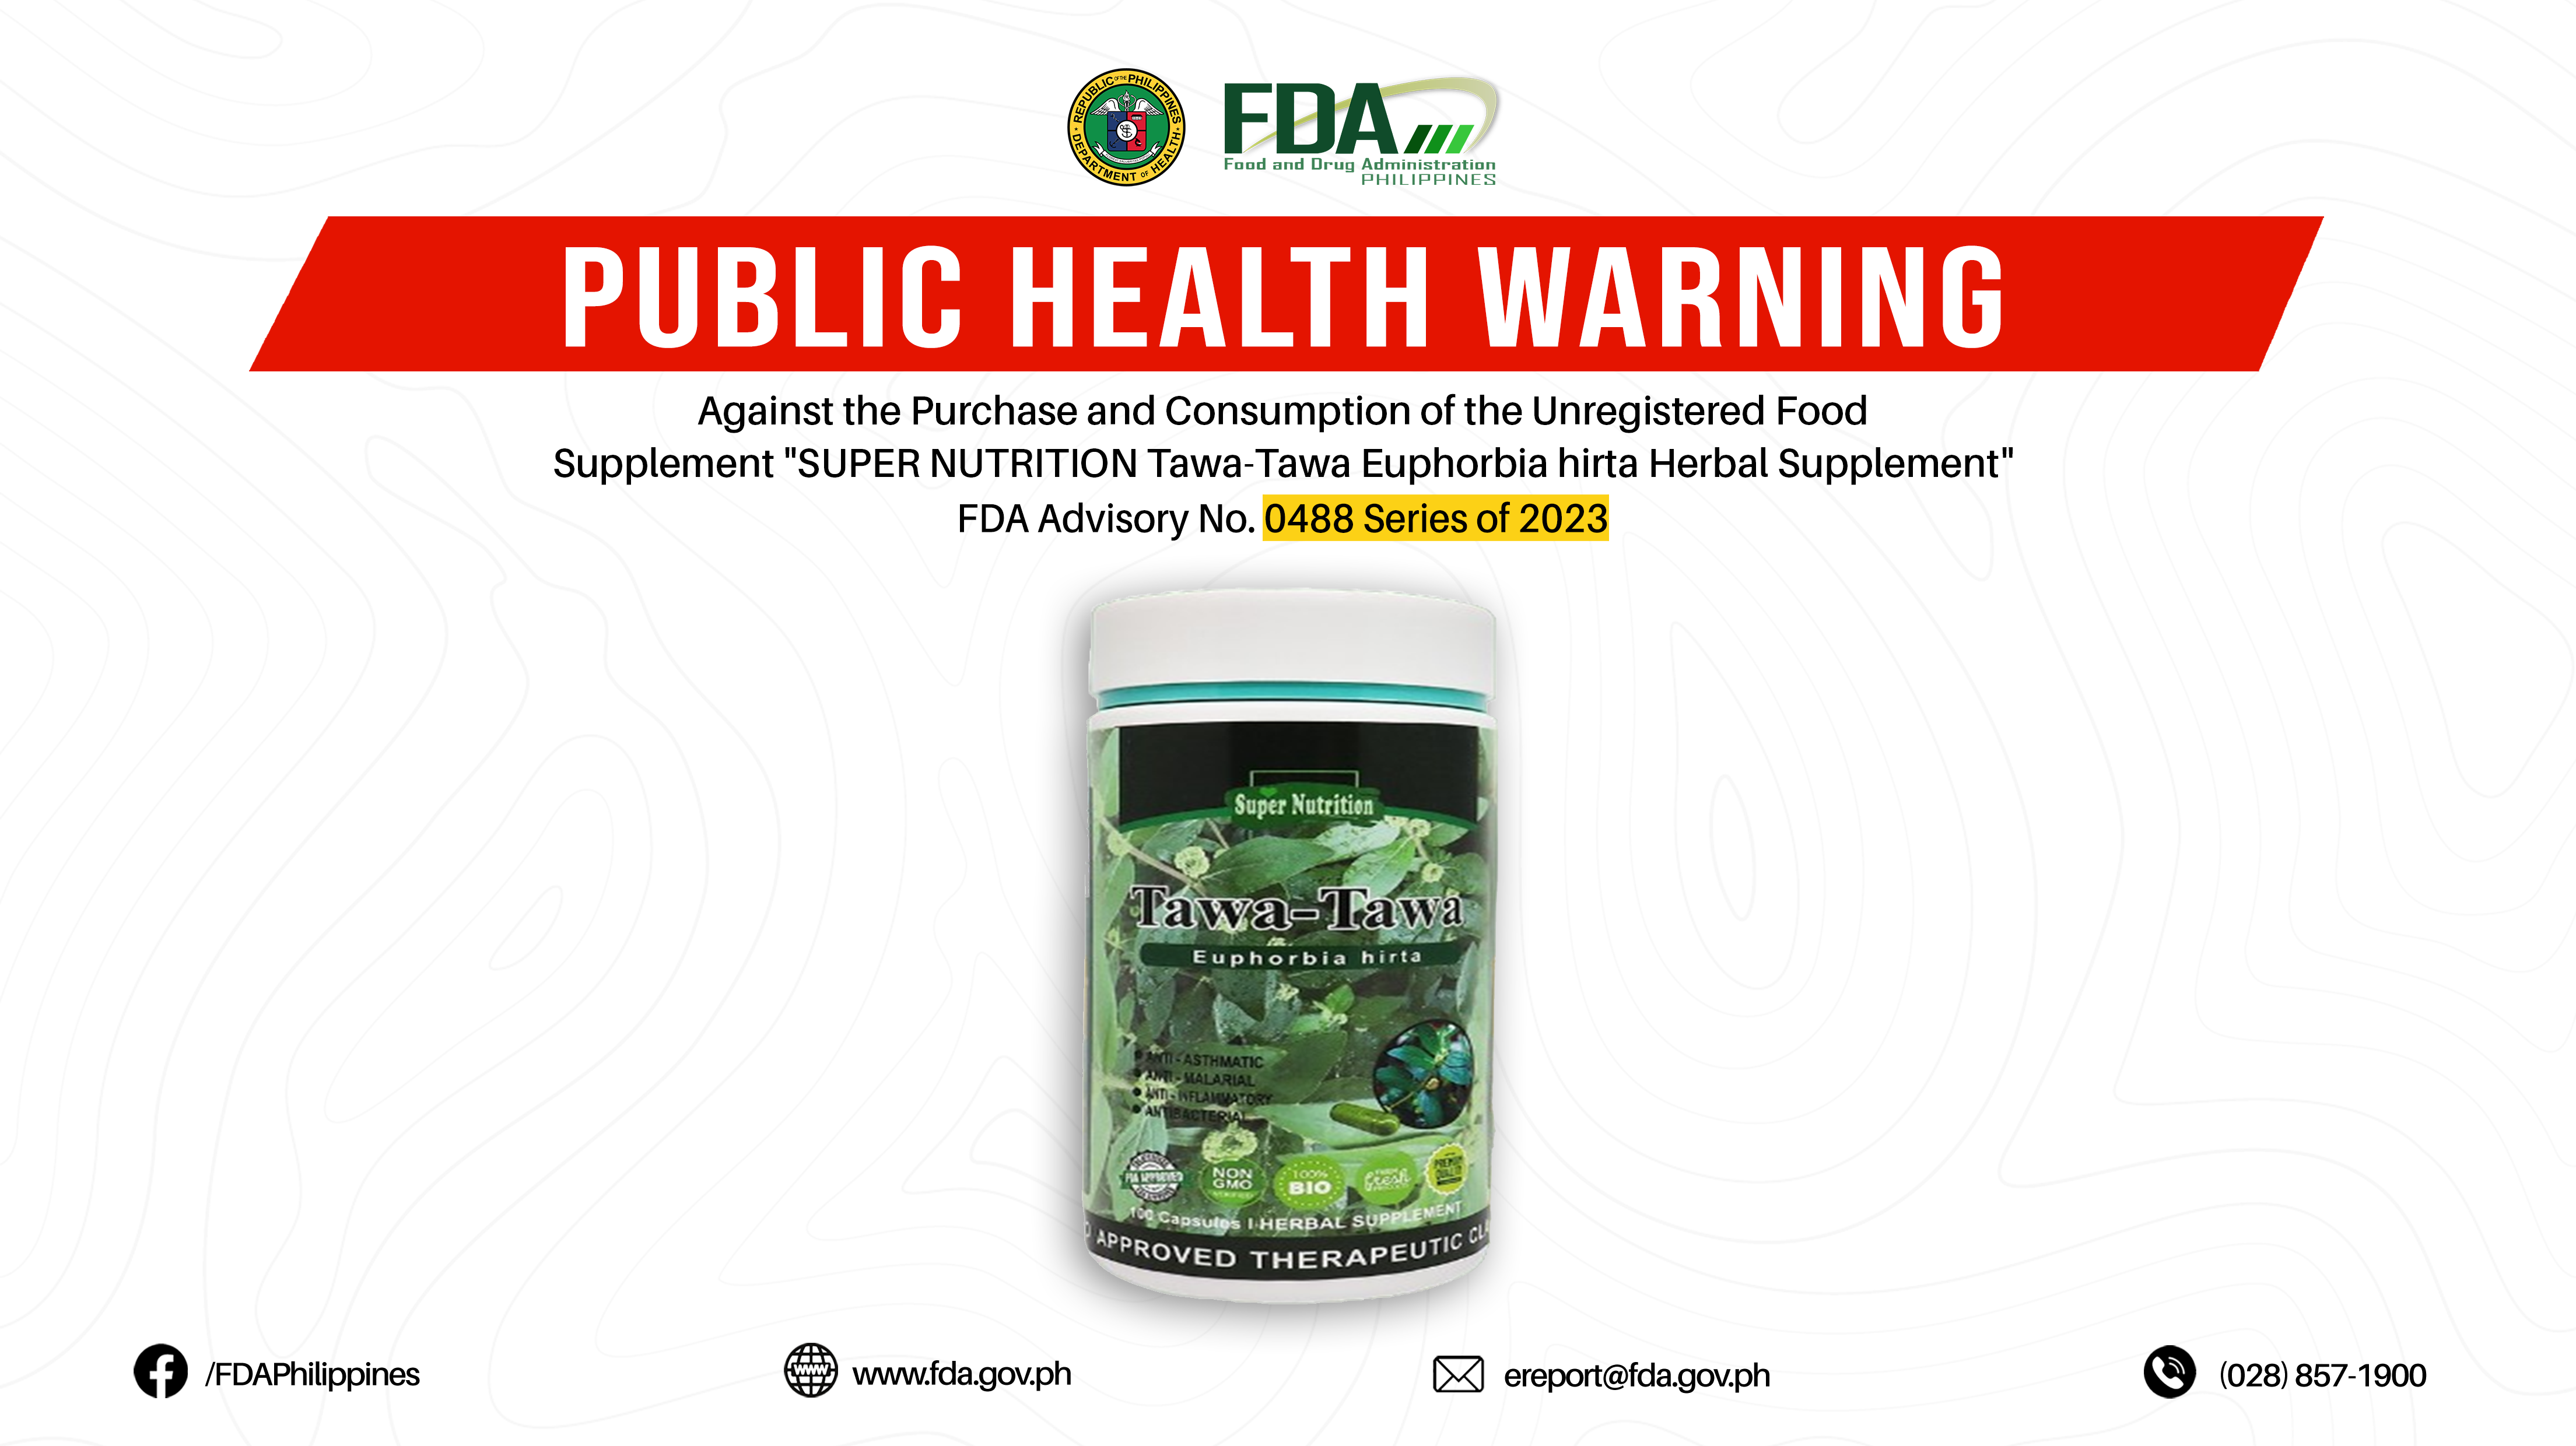 FDA Advisory No.2023-0488 || Public Health Warning Against the Purchase and Consumption of the Unregistered Food Supplement “SUPER NUTRITION Tawa-Tawa Euphorbia hirta Herbal Supplement”